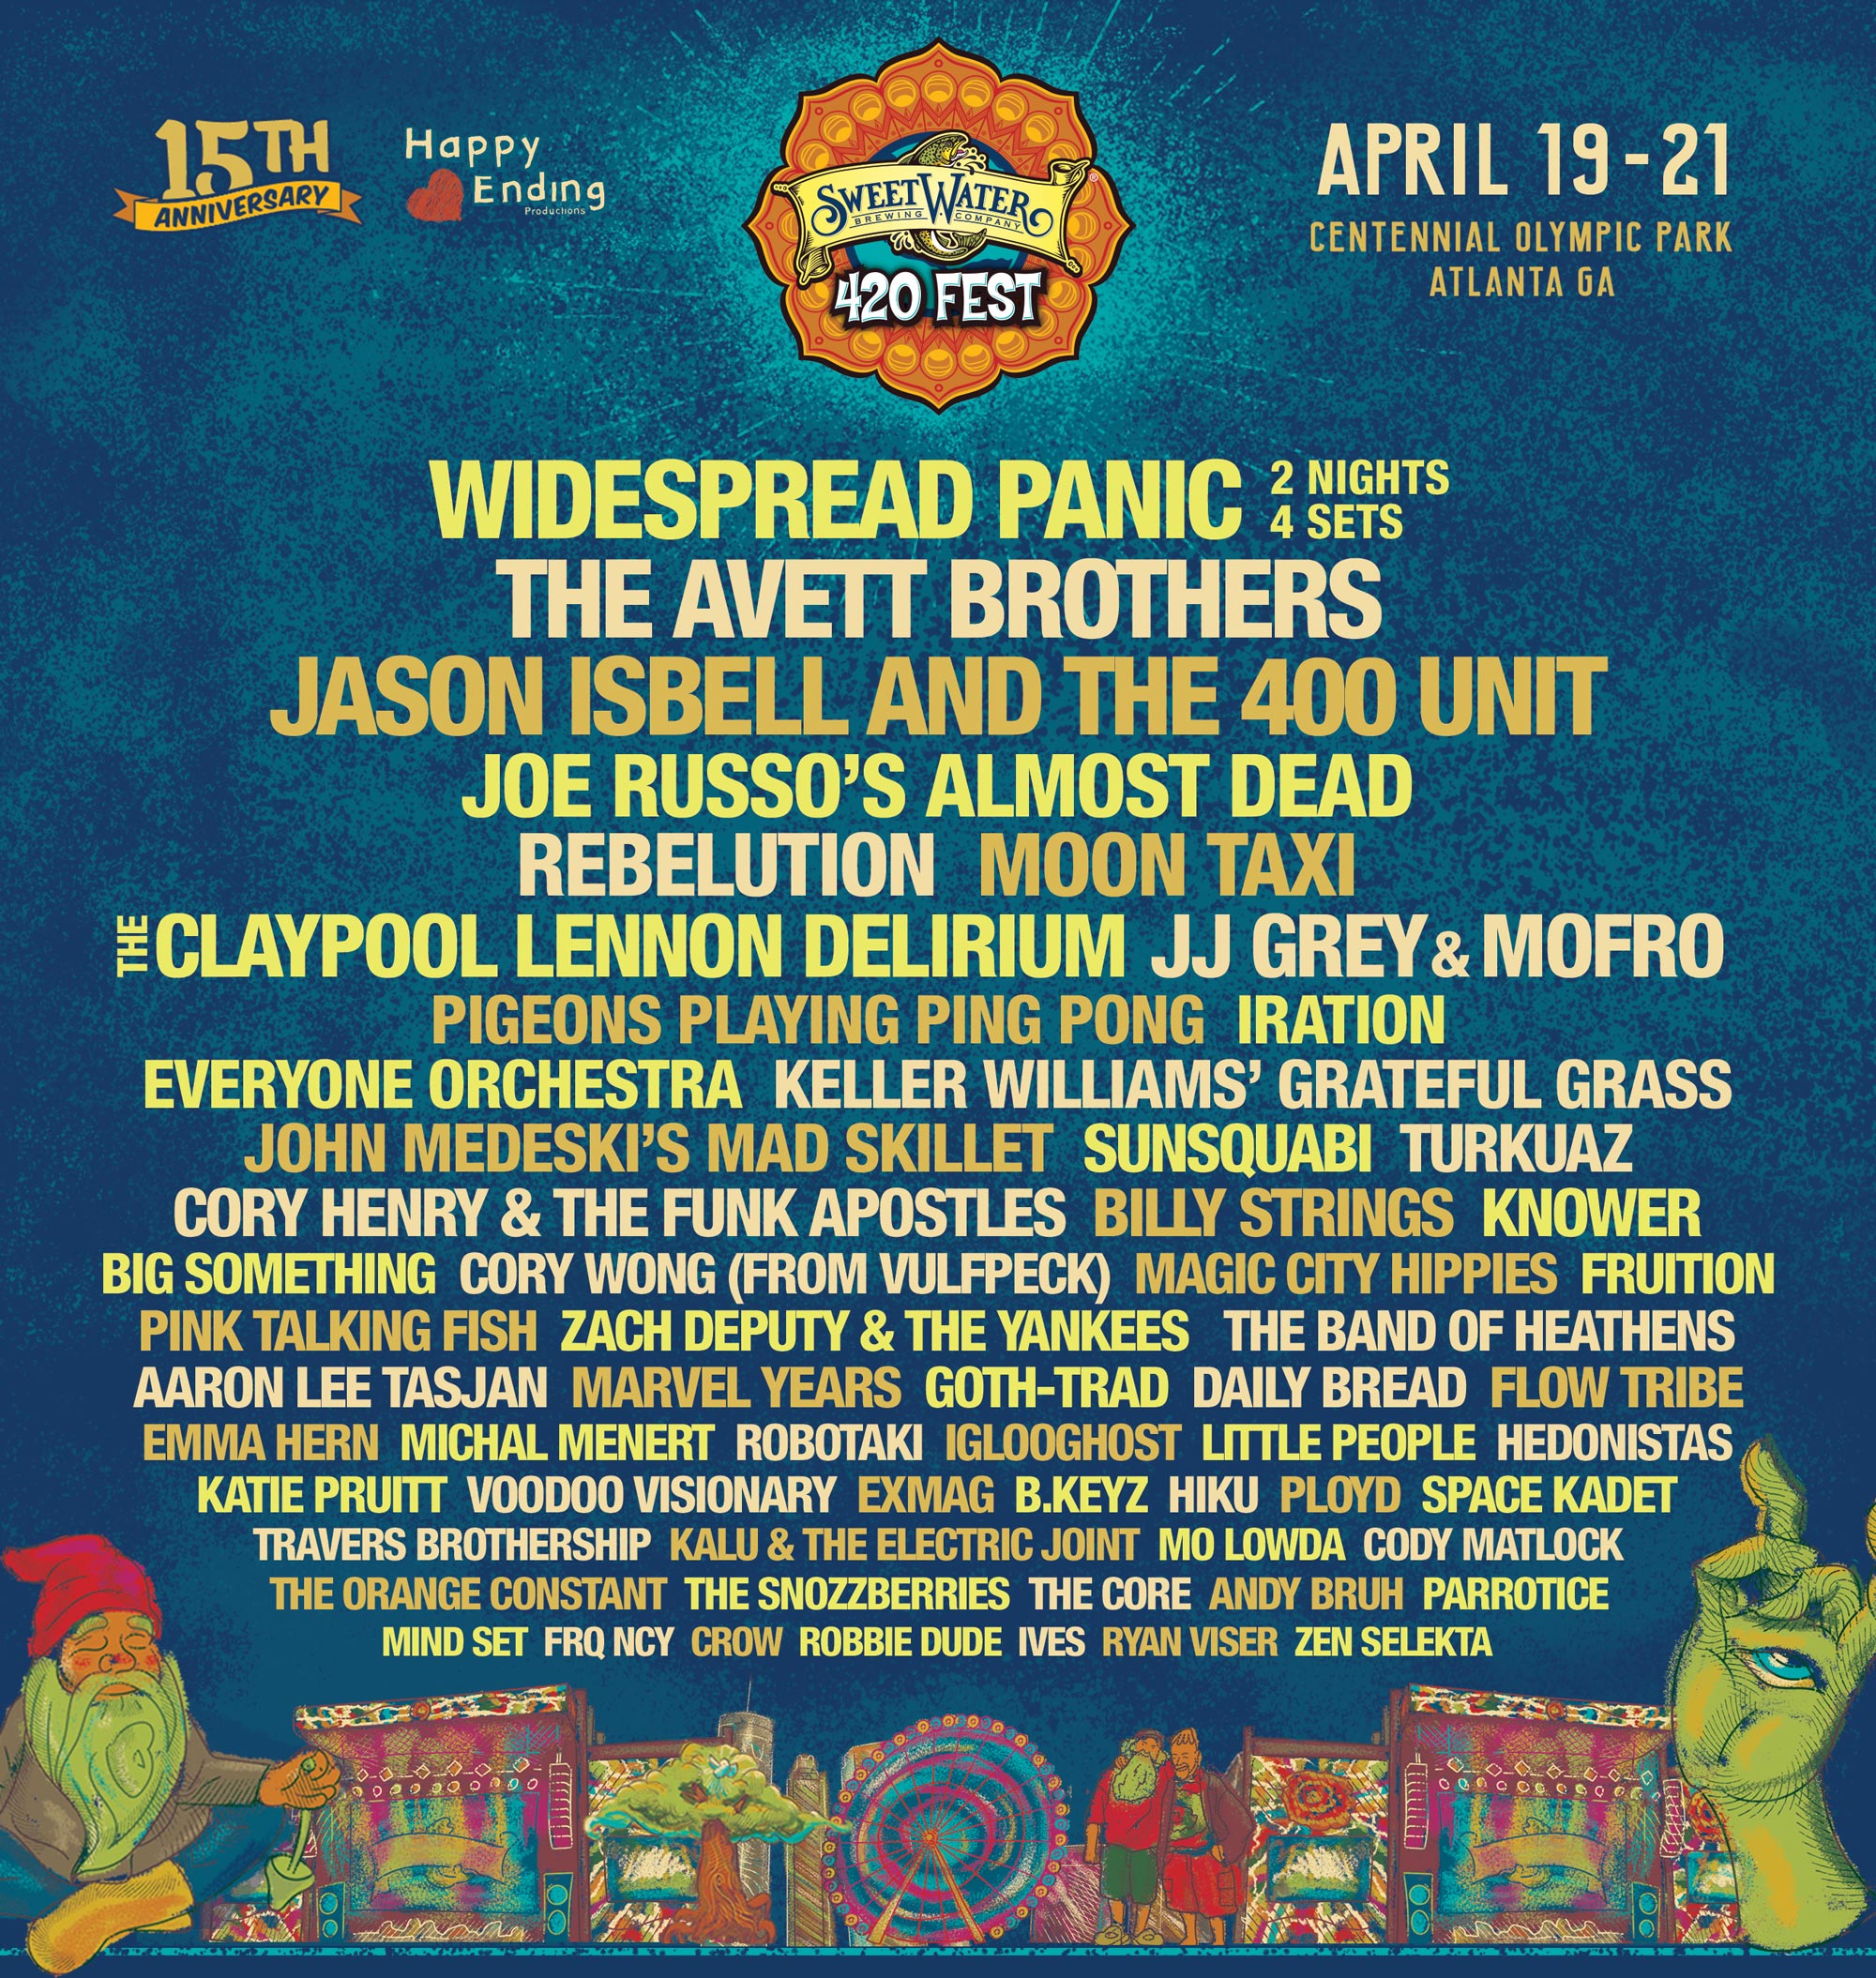 SweetWater 420 Fest 2019 April 21st Creative Loafing